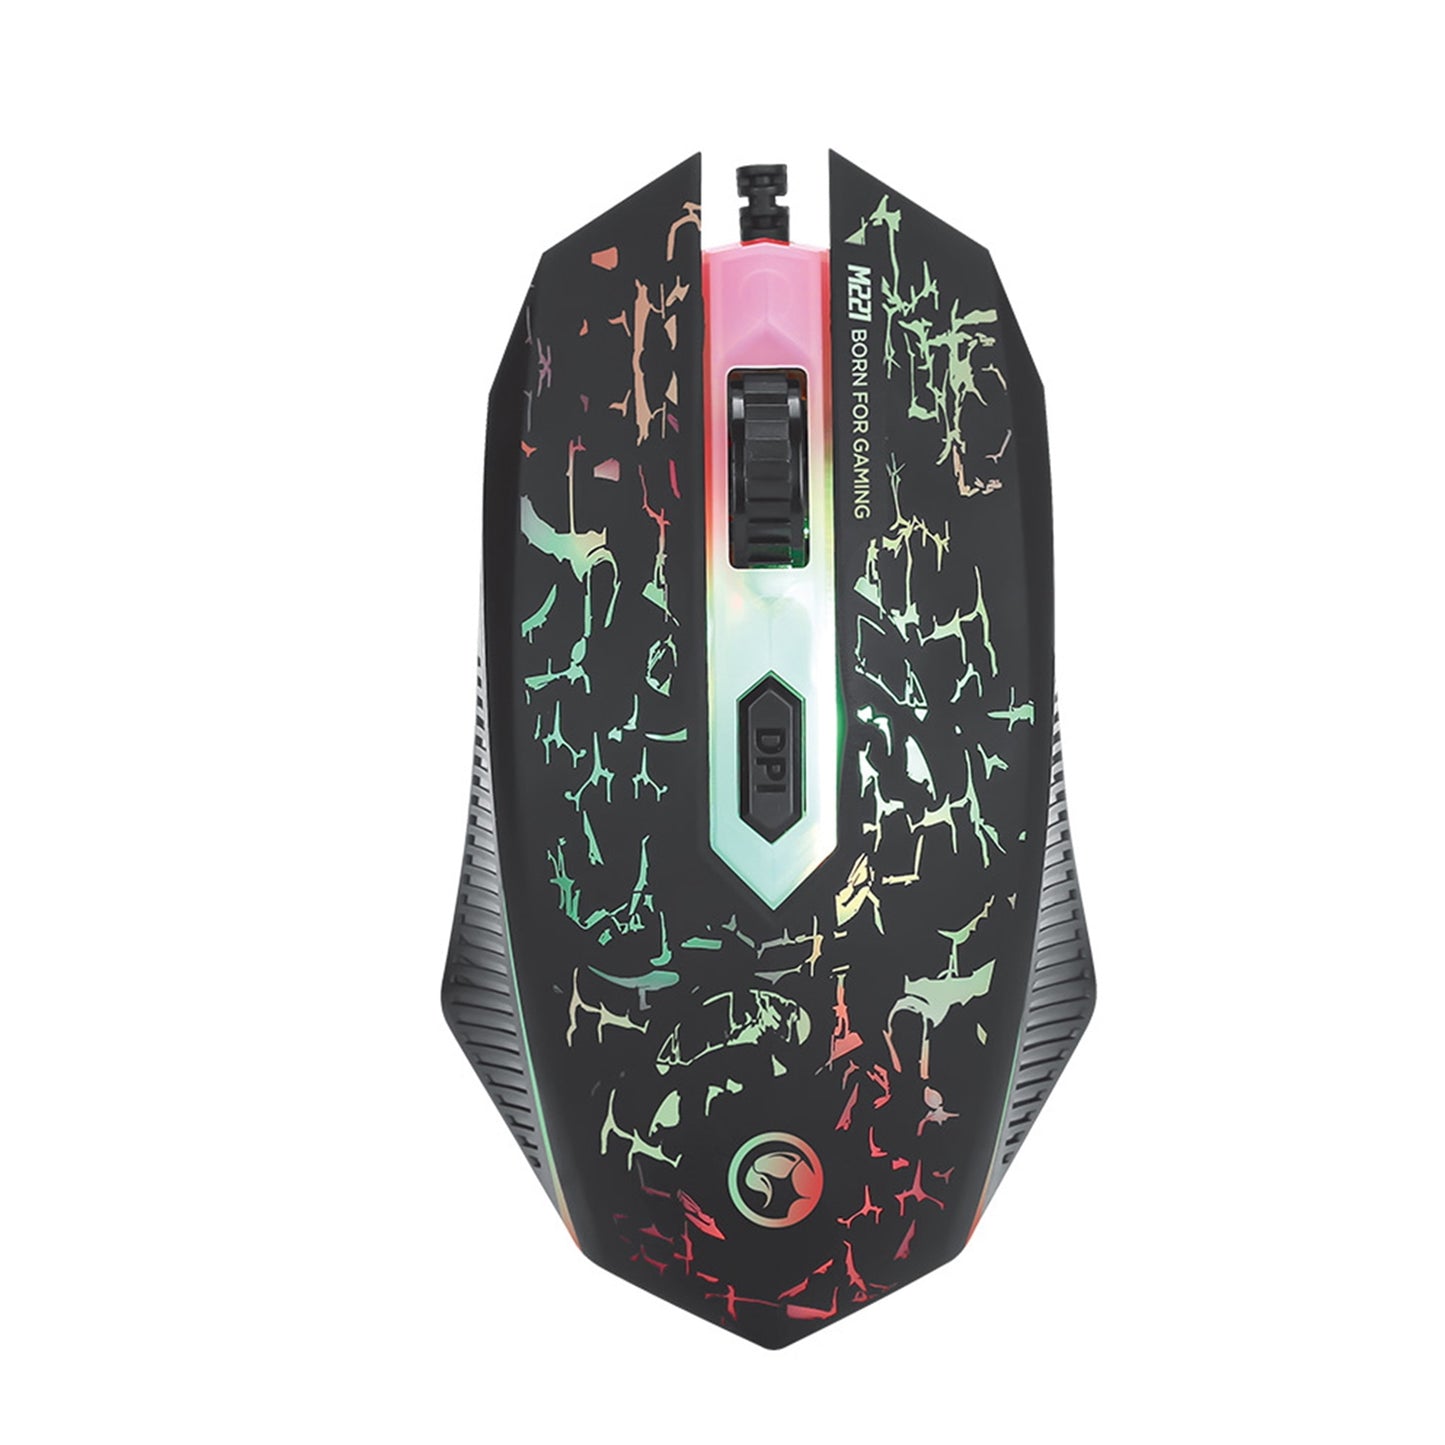 Marvo Scorpion CM375 4-in-1 Gaming Bundle, Wired Keyboard, Mouse, Headset and Mouse Pad, 7 Colour LED, Multimedia, Anti-ghosting Keys, 3200 dpi Mouse, Non-slip Mouse Pad and Stereo Headset